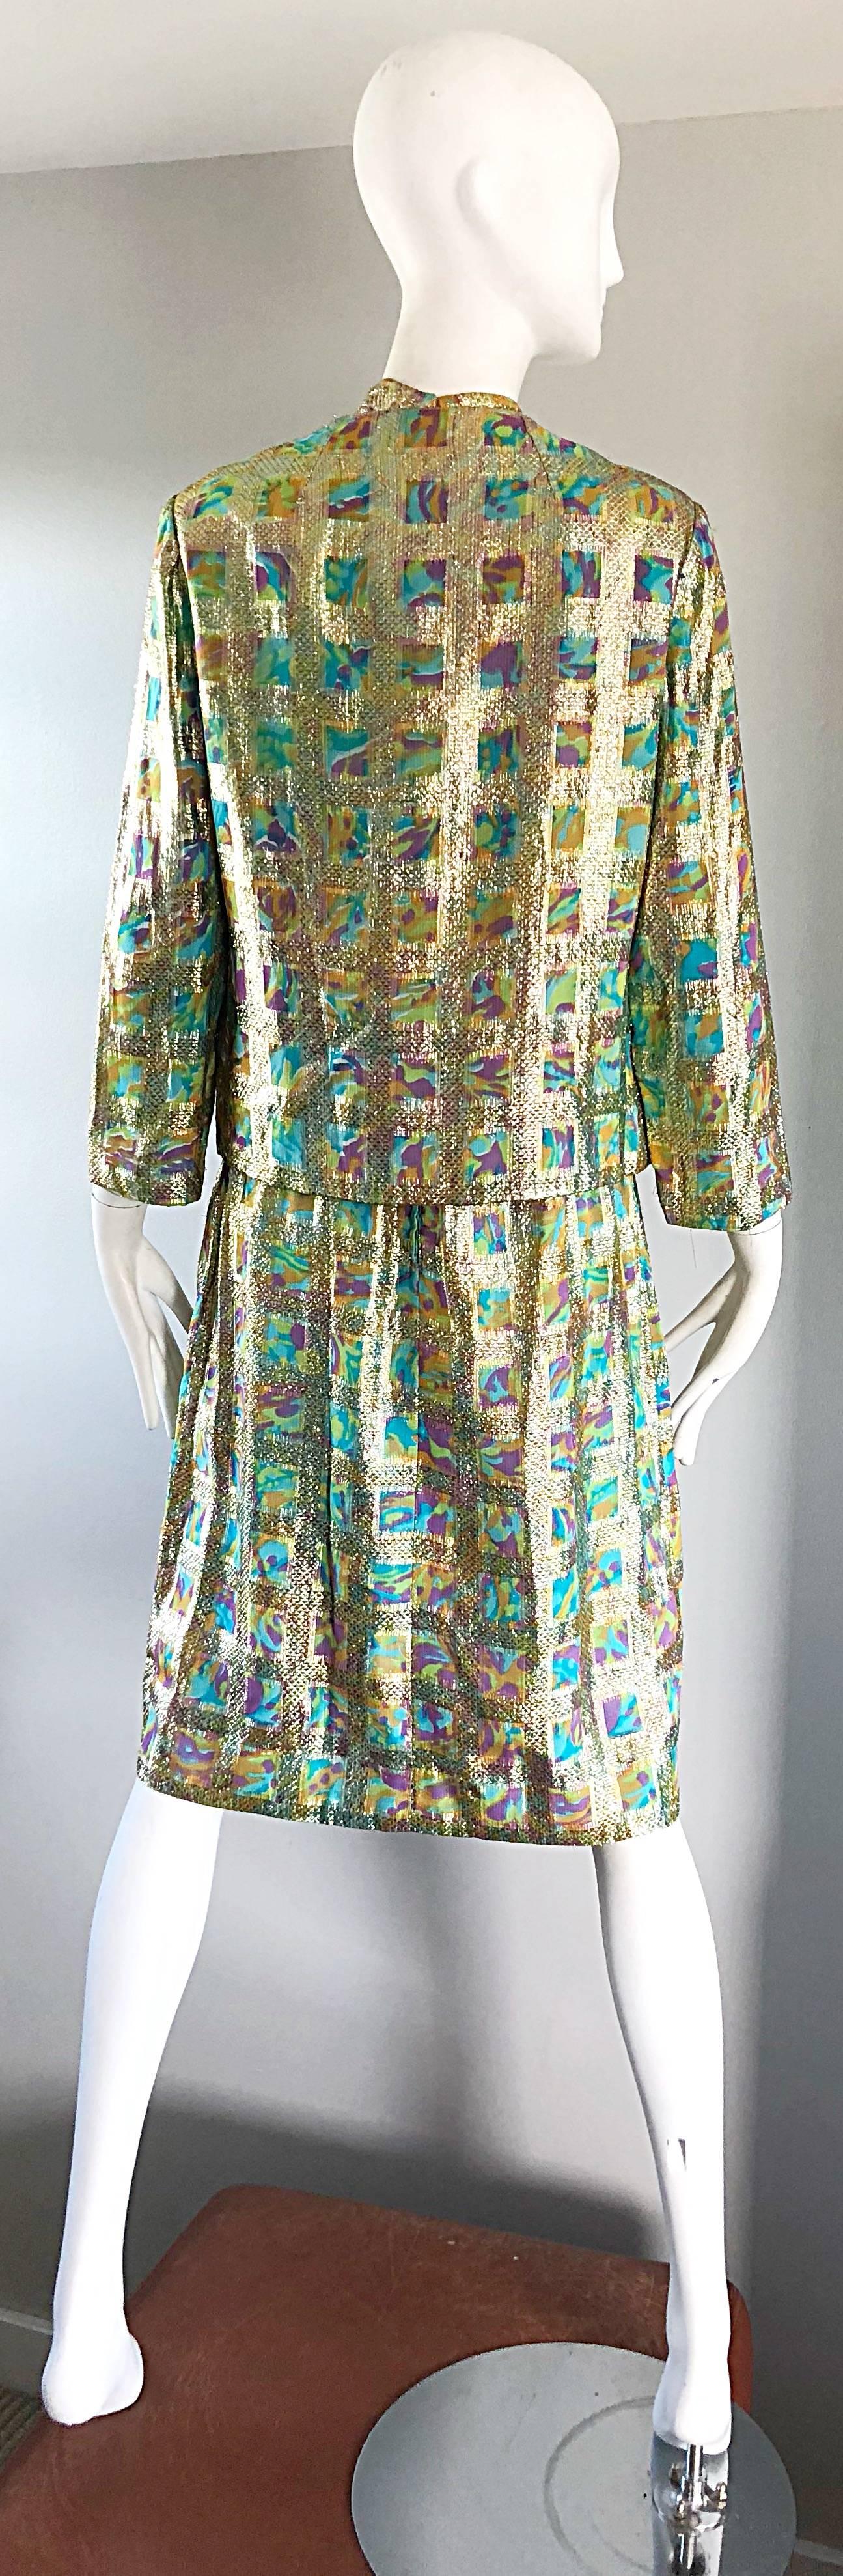 1960s Mardi Gras Gold Silk Lame Colorful Shift Dress and Jacket, Vintage 60s Set In Excellent Condition For Sale In San Diego, CA